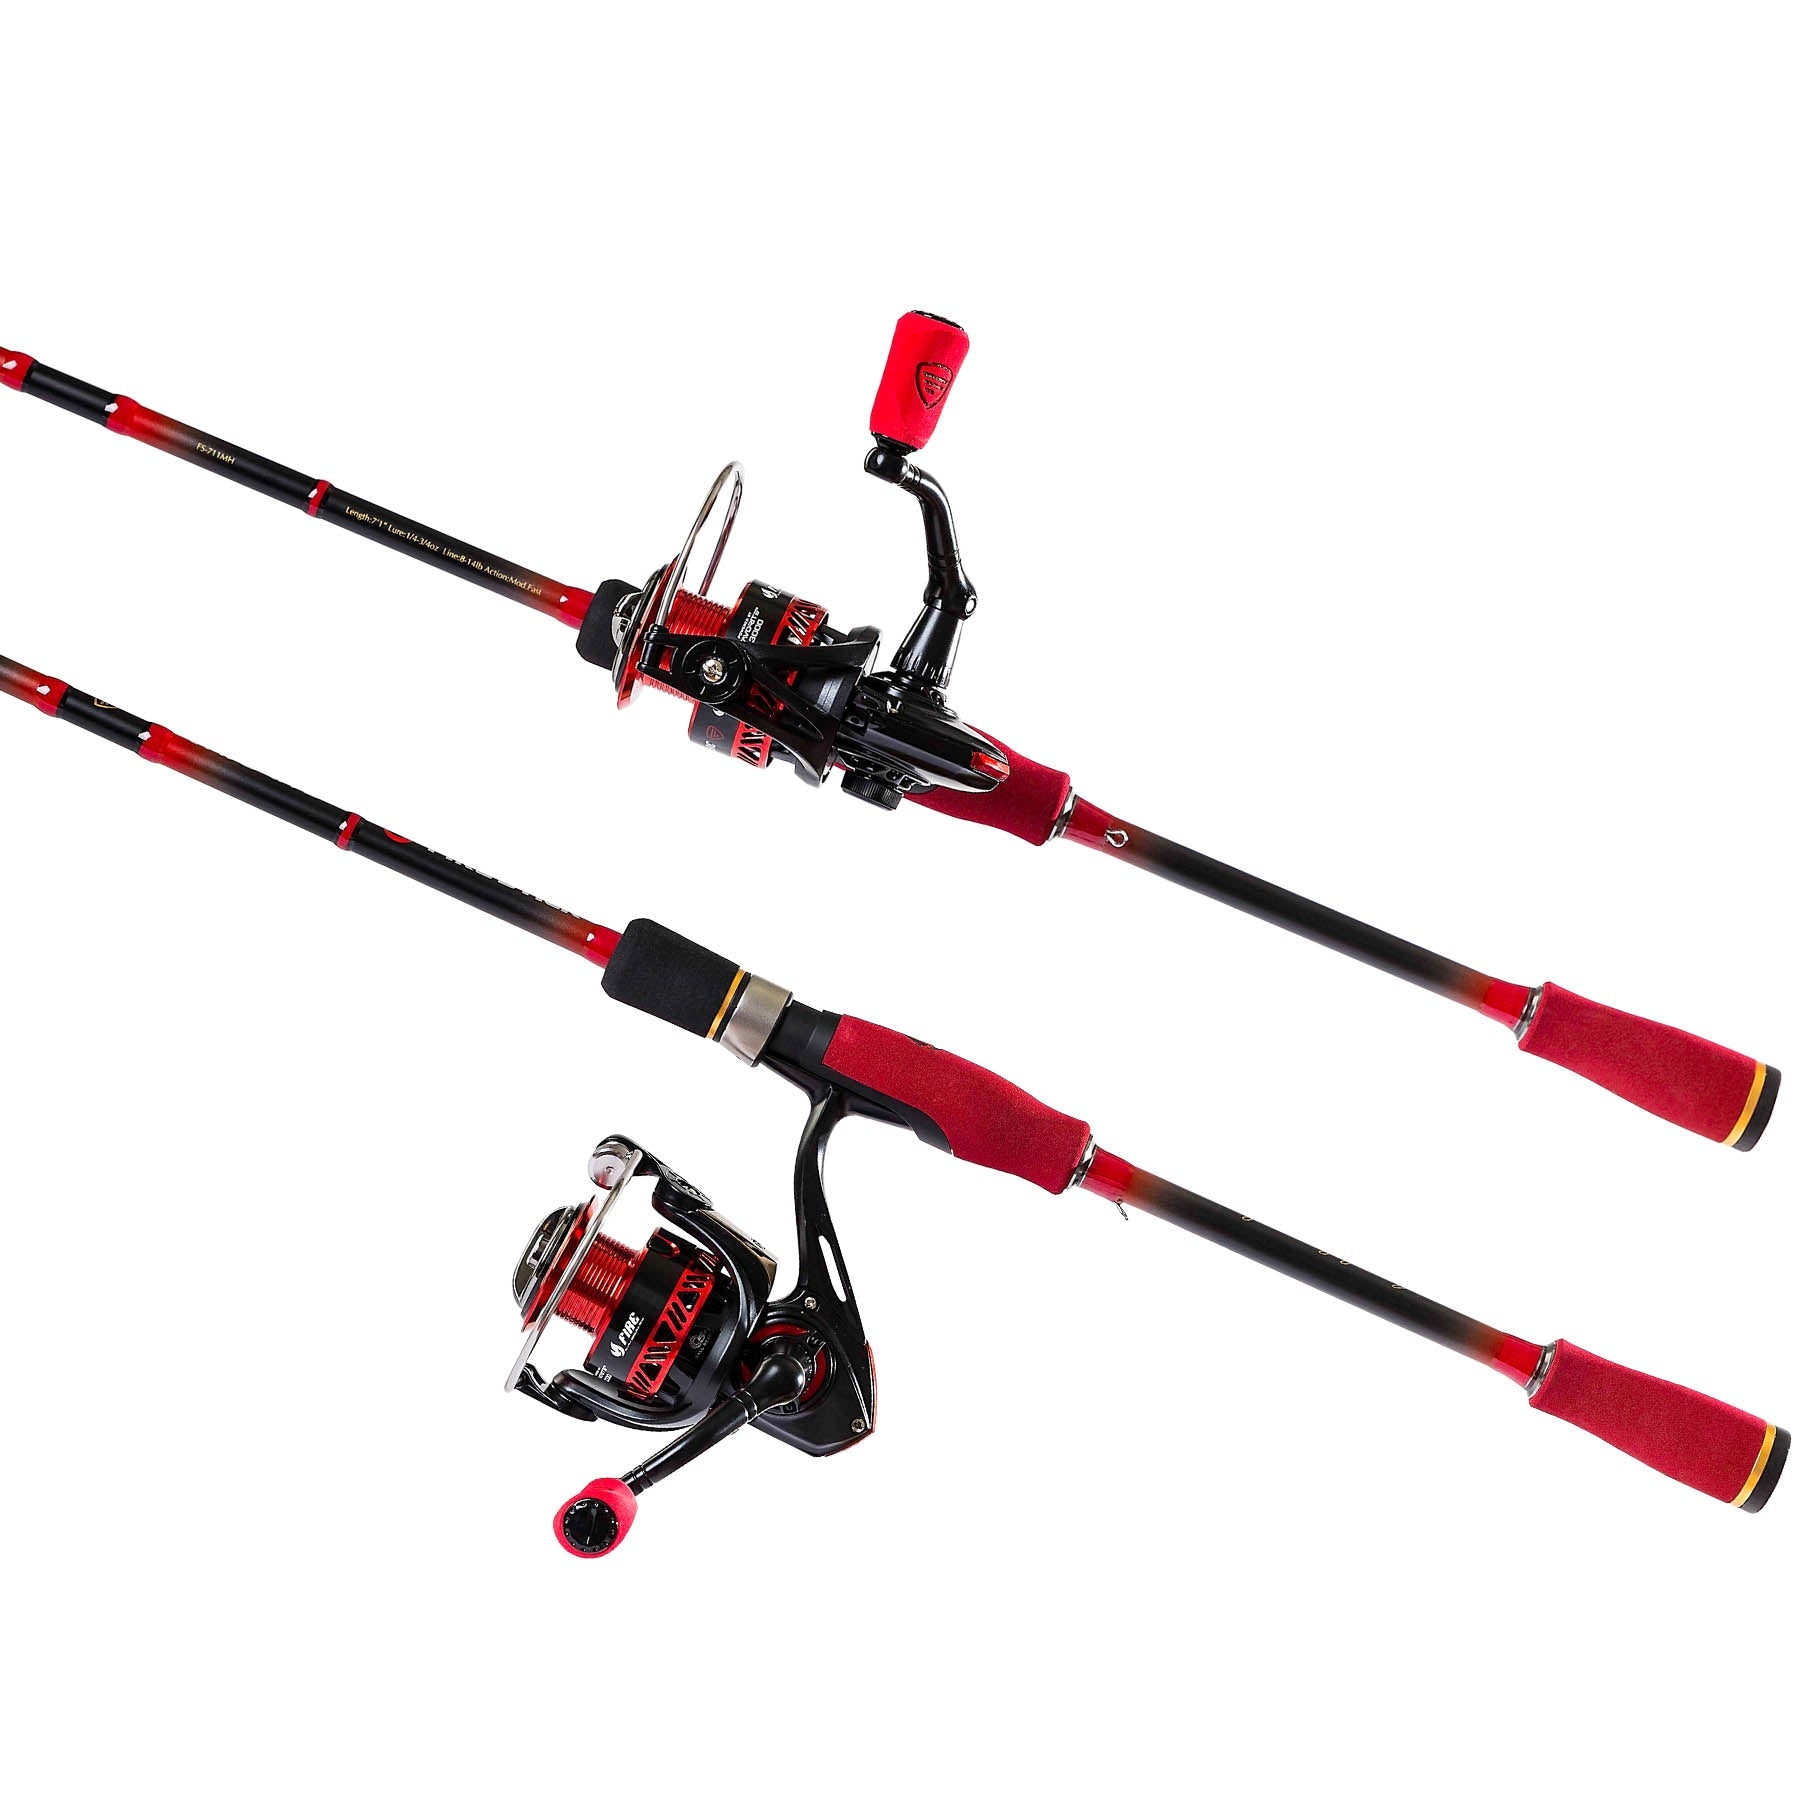 Favorite Fishing PBF Fire Stick Spinning Combo FS711MH30 with Free